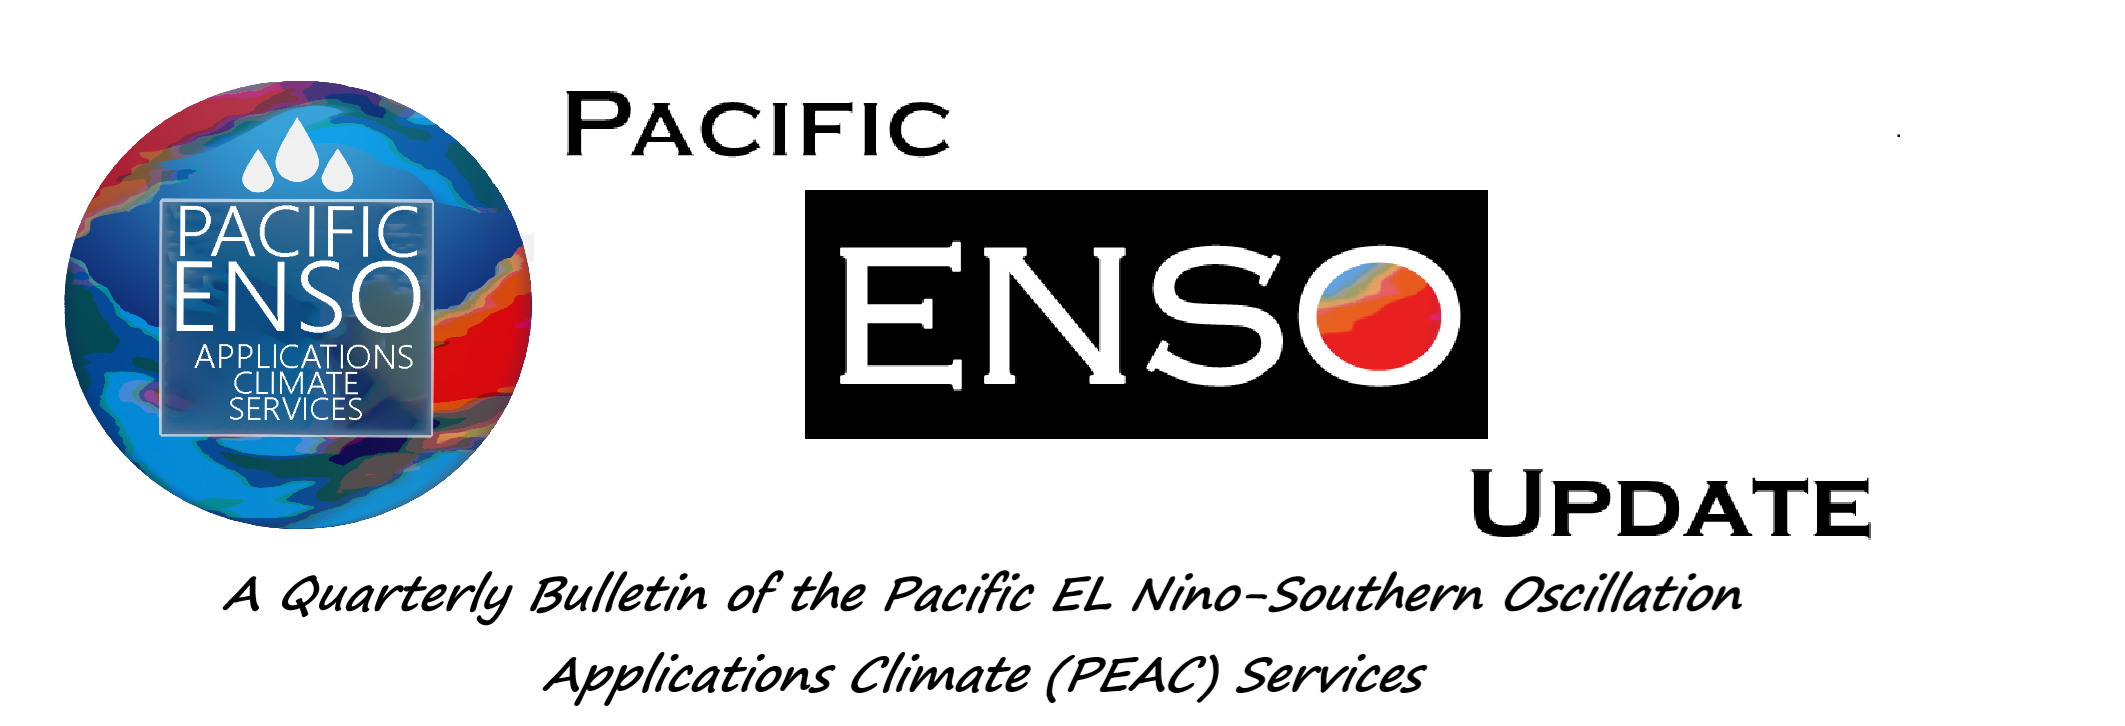 Pacific ENSO Update